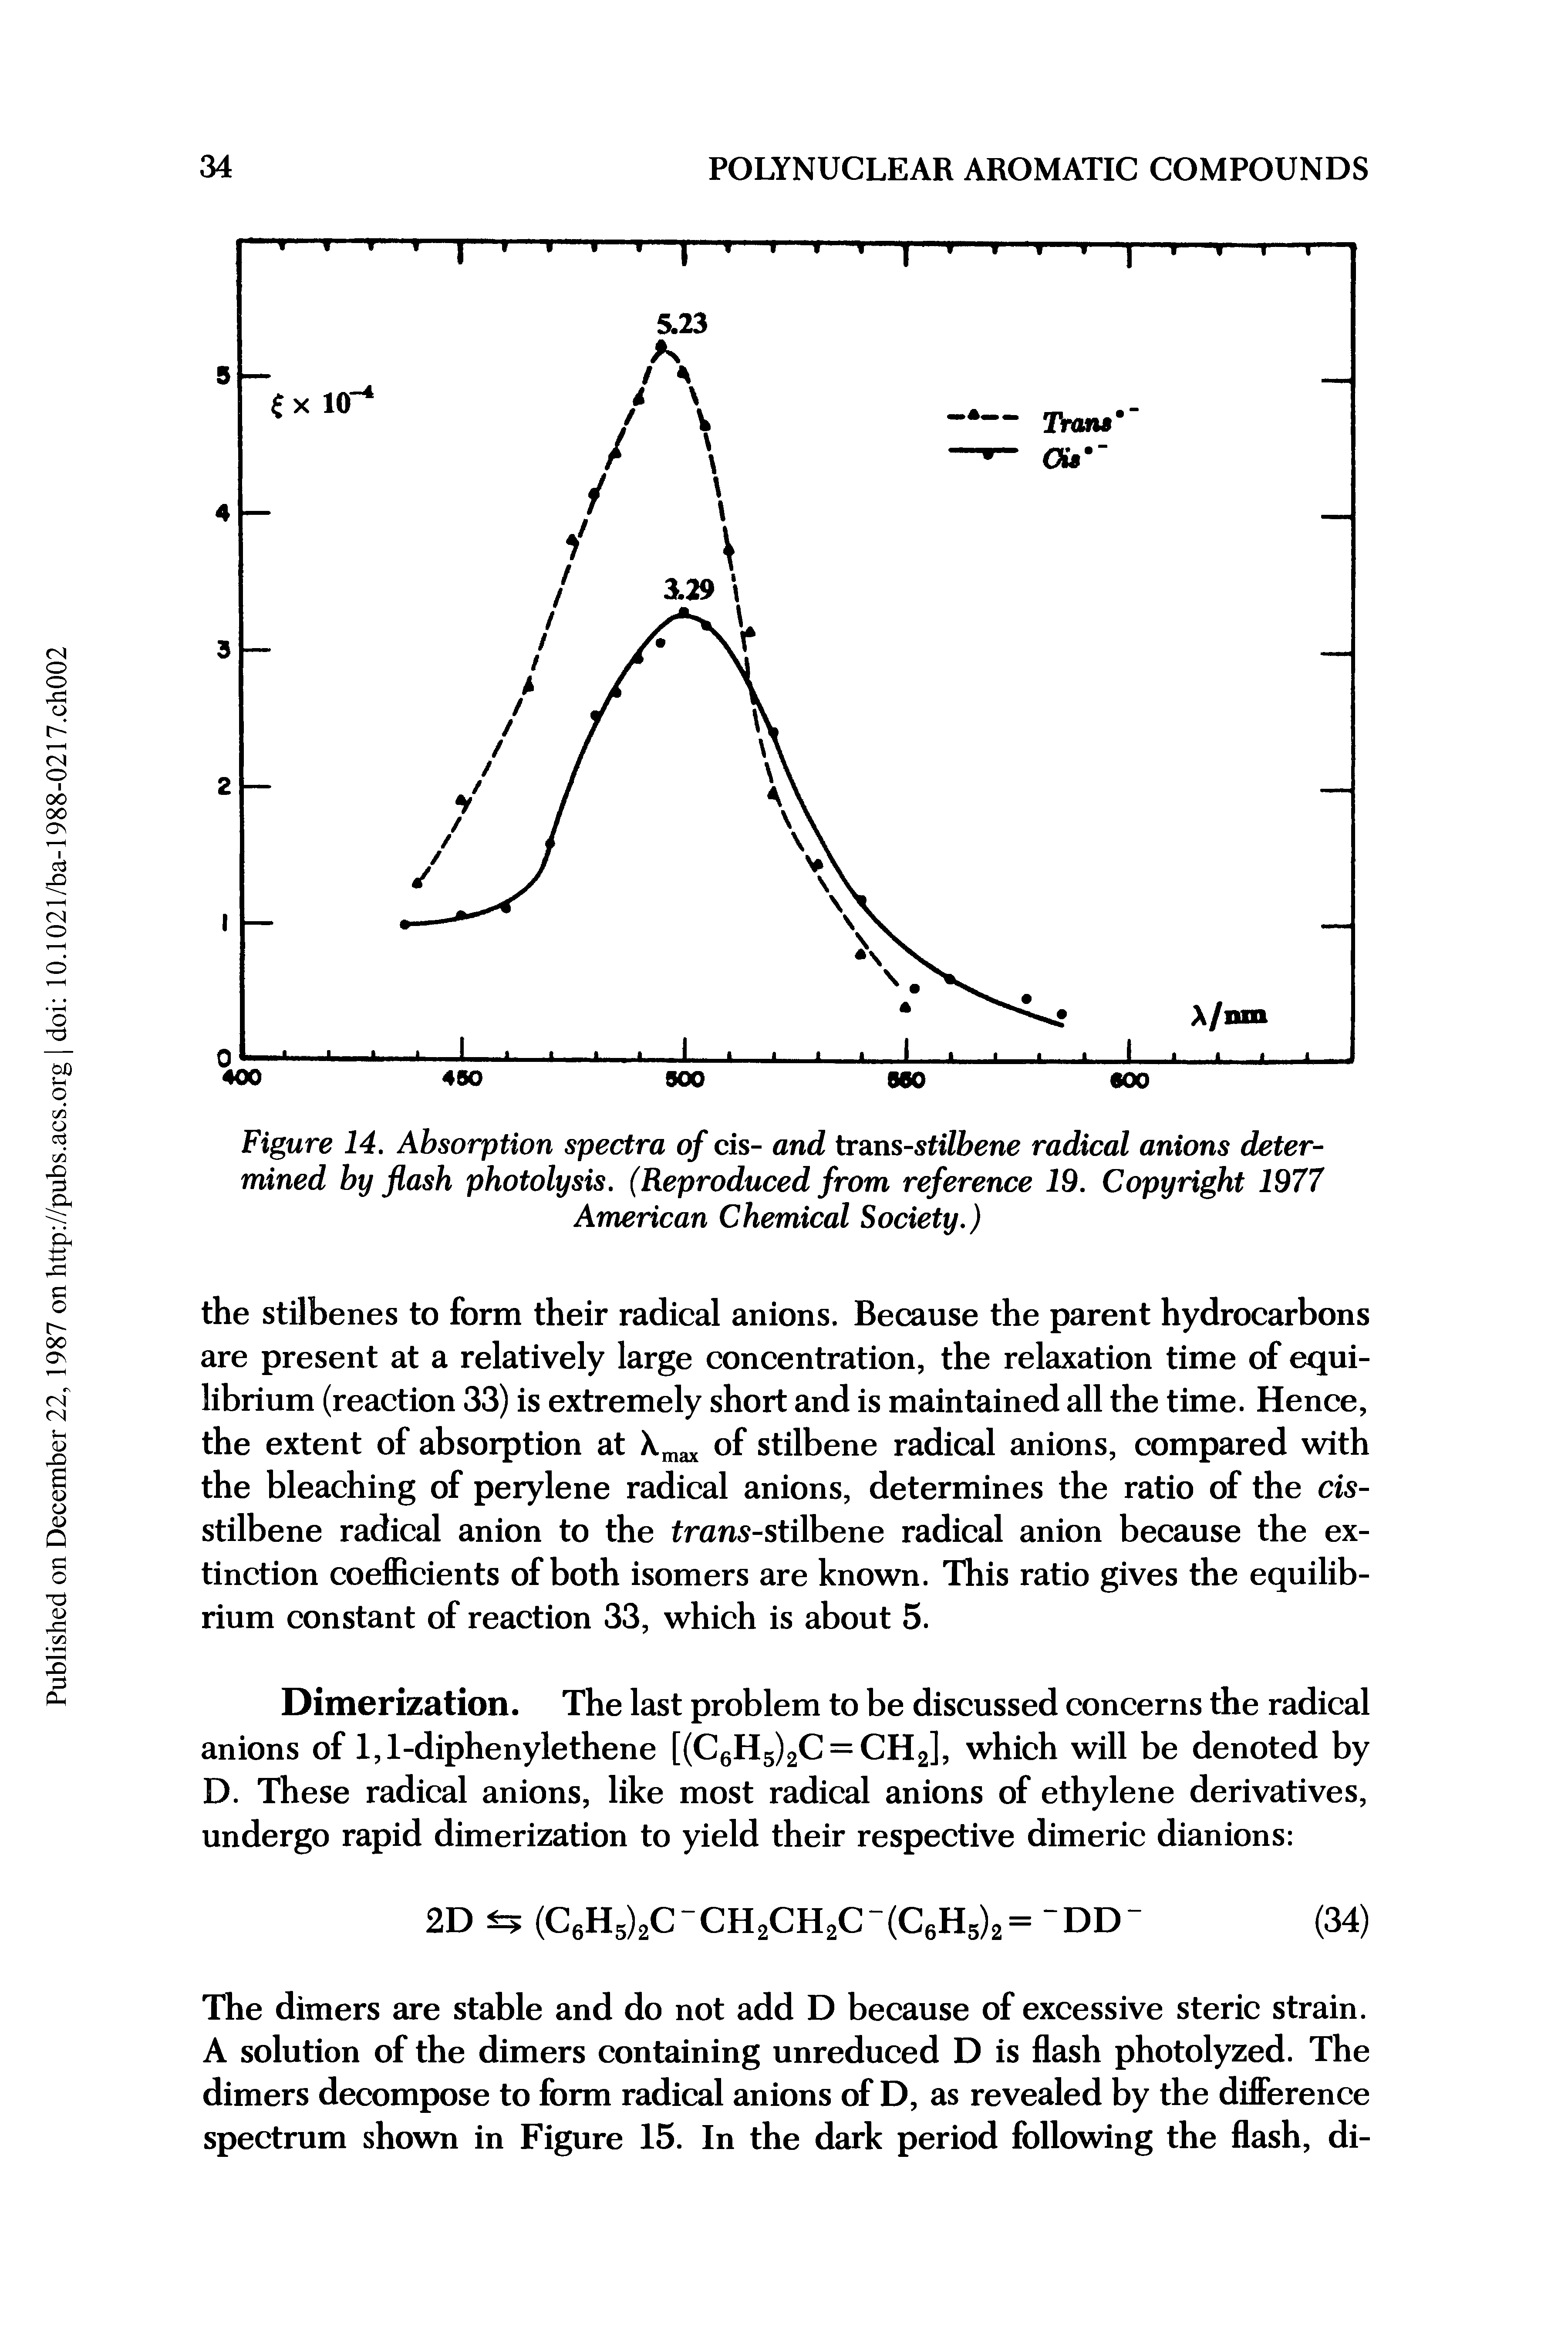 Figure 14. Absorption spectra of cis- and trans-stilbene radical anions determined by flash photolysis. (Reproduced from reference 19. Copyright 1977 American Chemical Society.)...